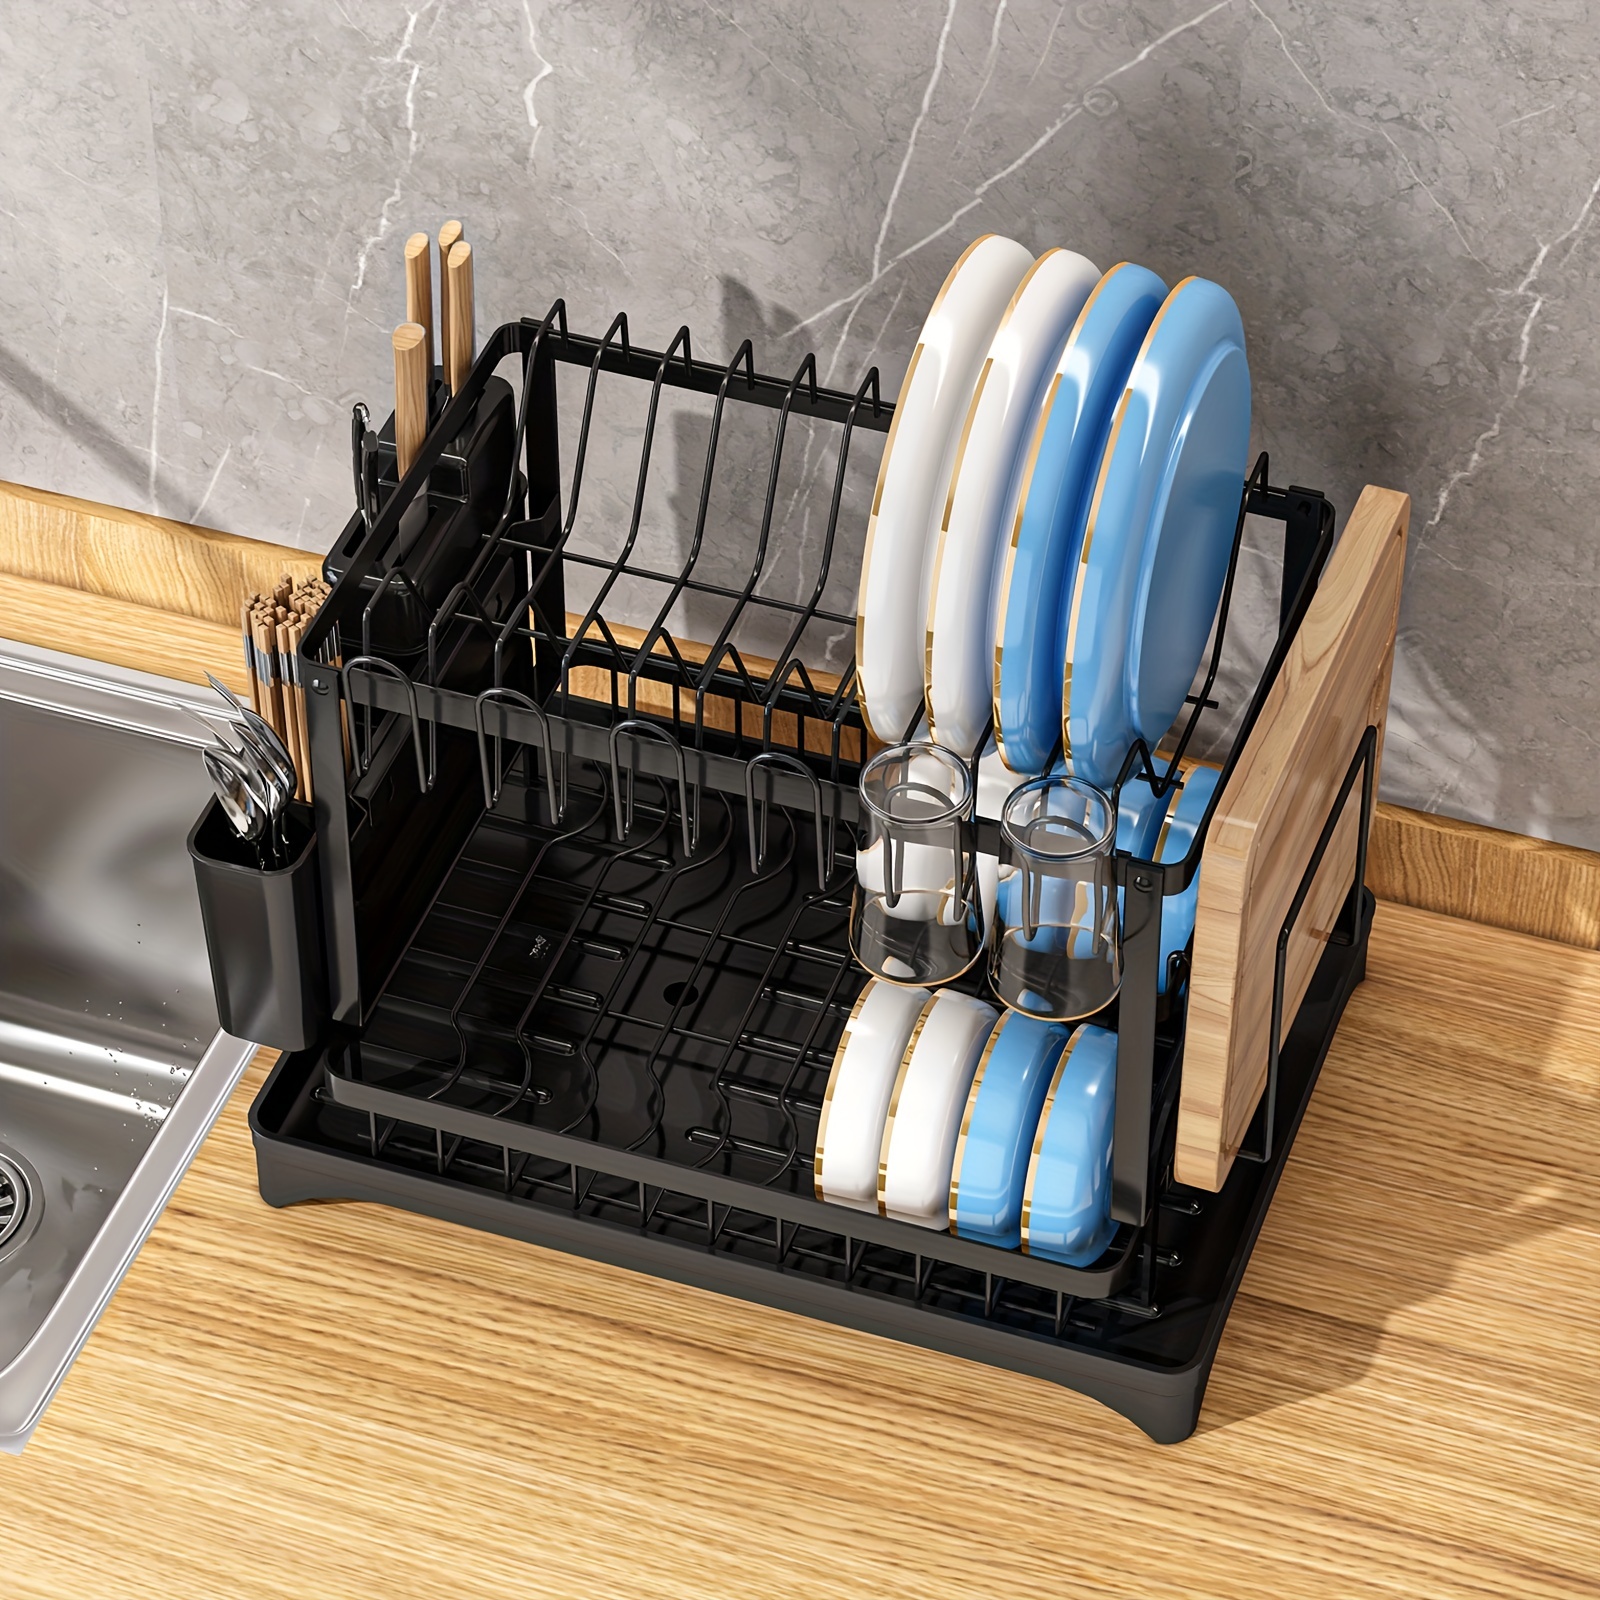 Dish drying rack, Dish rack for kitchen counter, 2 tier large dish drying  rack with drainboard, stainless steel dish drainer with drainage utensil  holder, for dish, Knives, Cup, Cutting board, Kitchen Accessories 